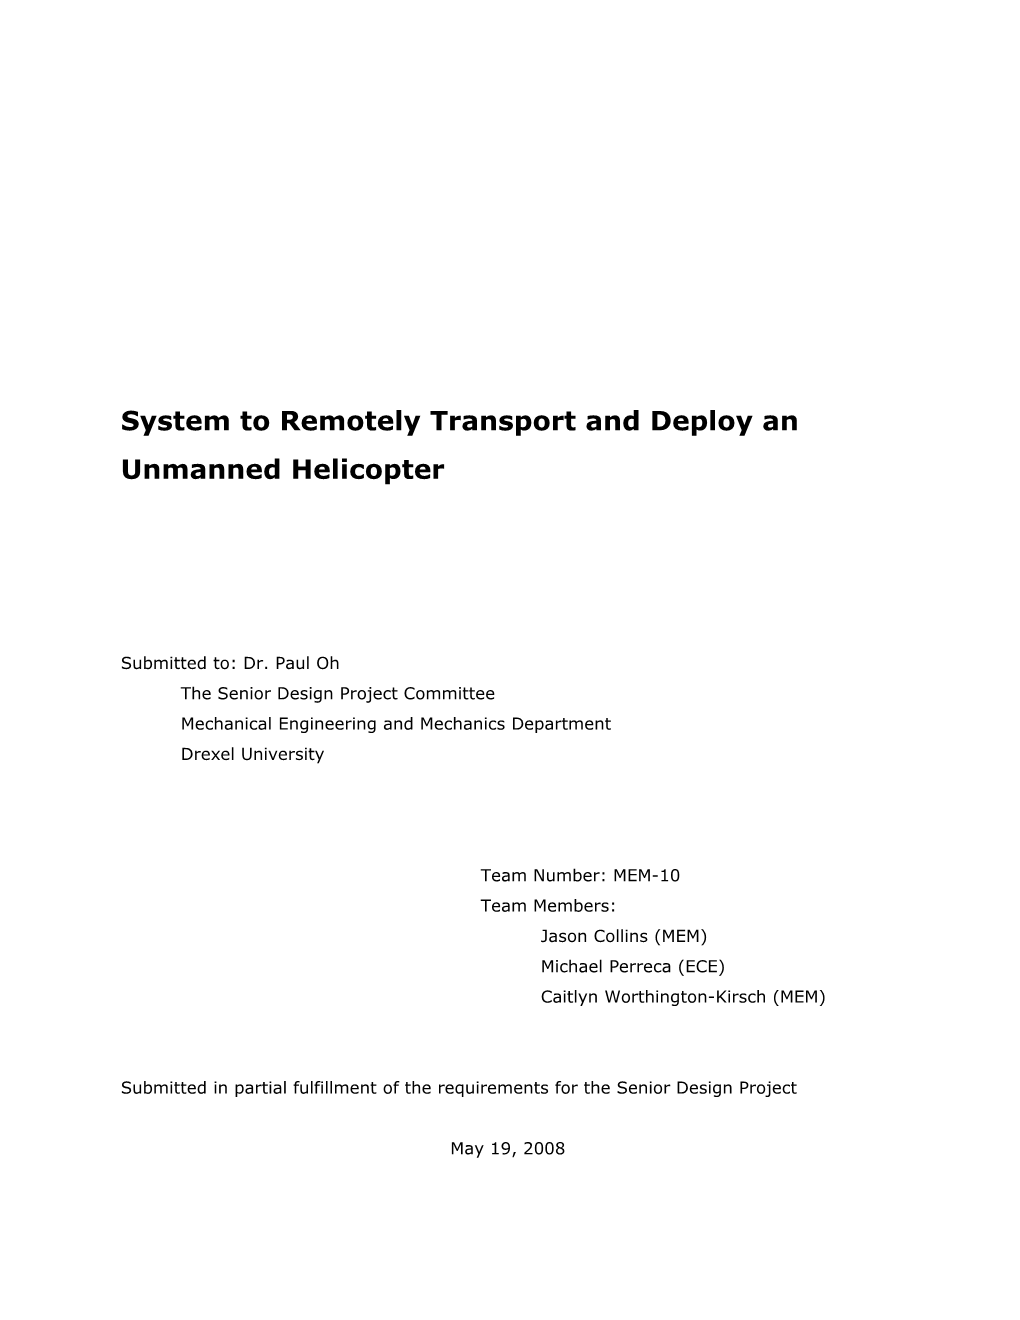 System to Remotely Transport and Deploy an Unmanned Helicopter